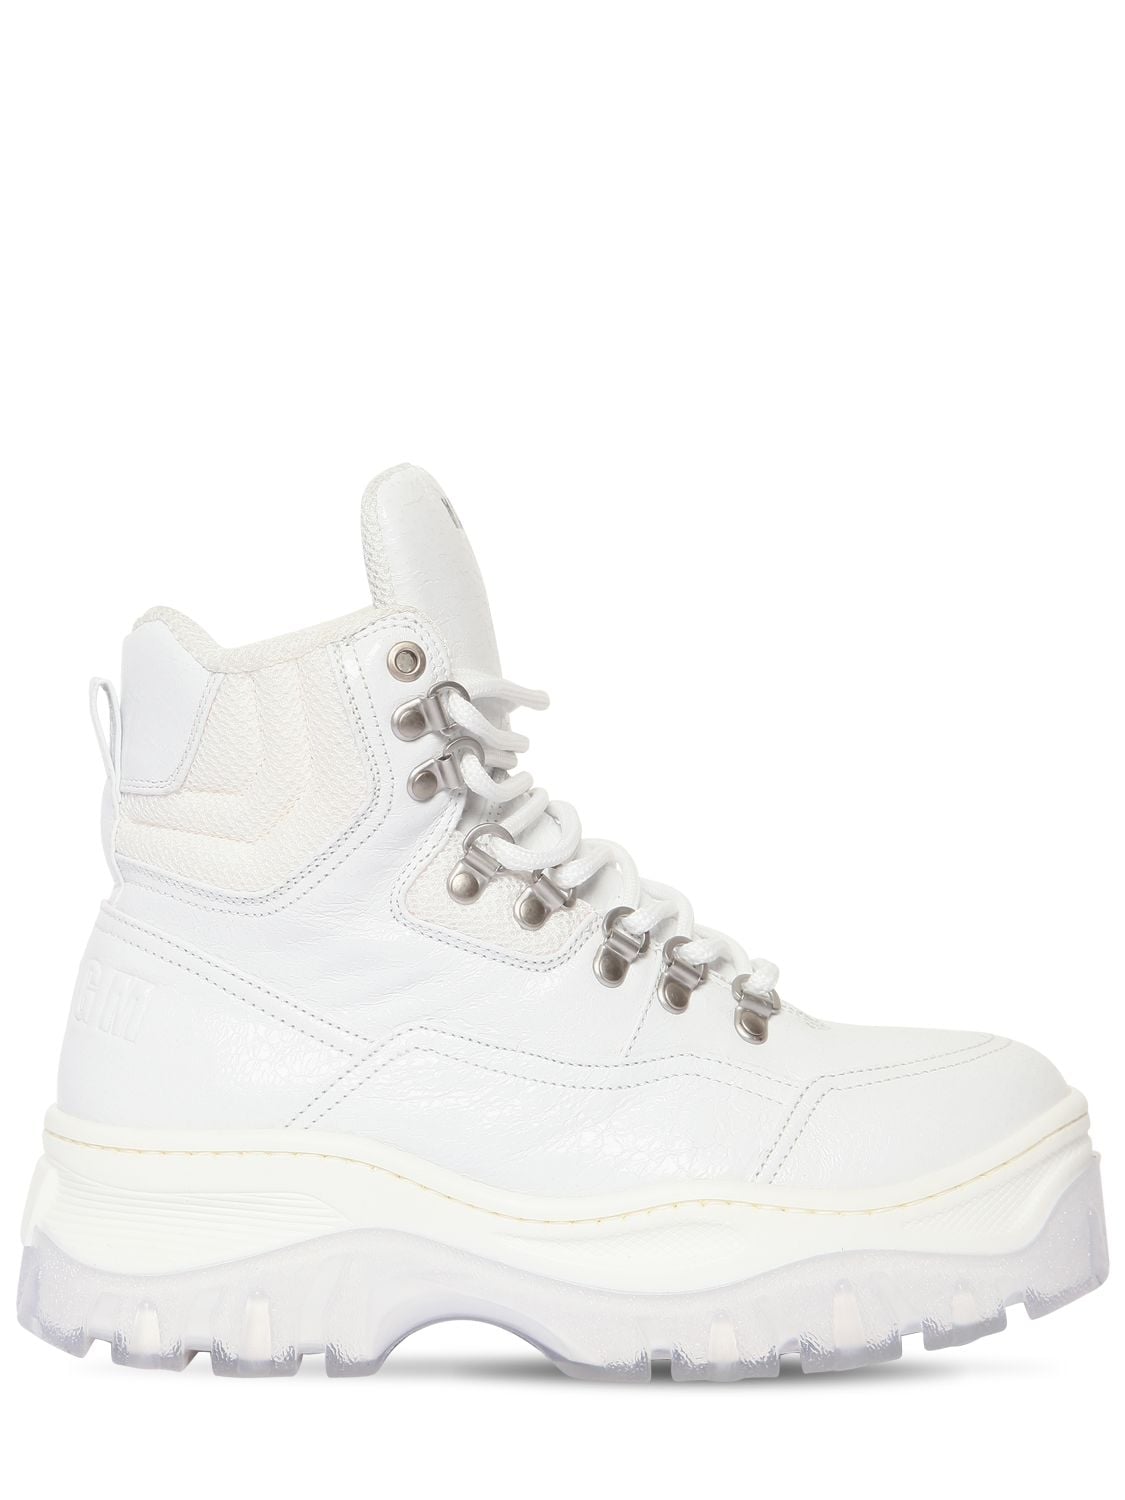 Msgm 60mm Tractor Leather & Mesh Ankle Boots In White